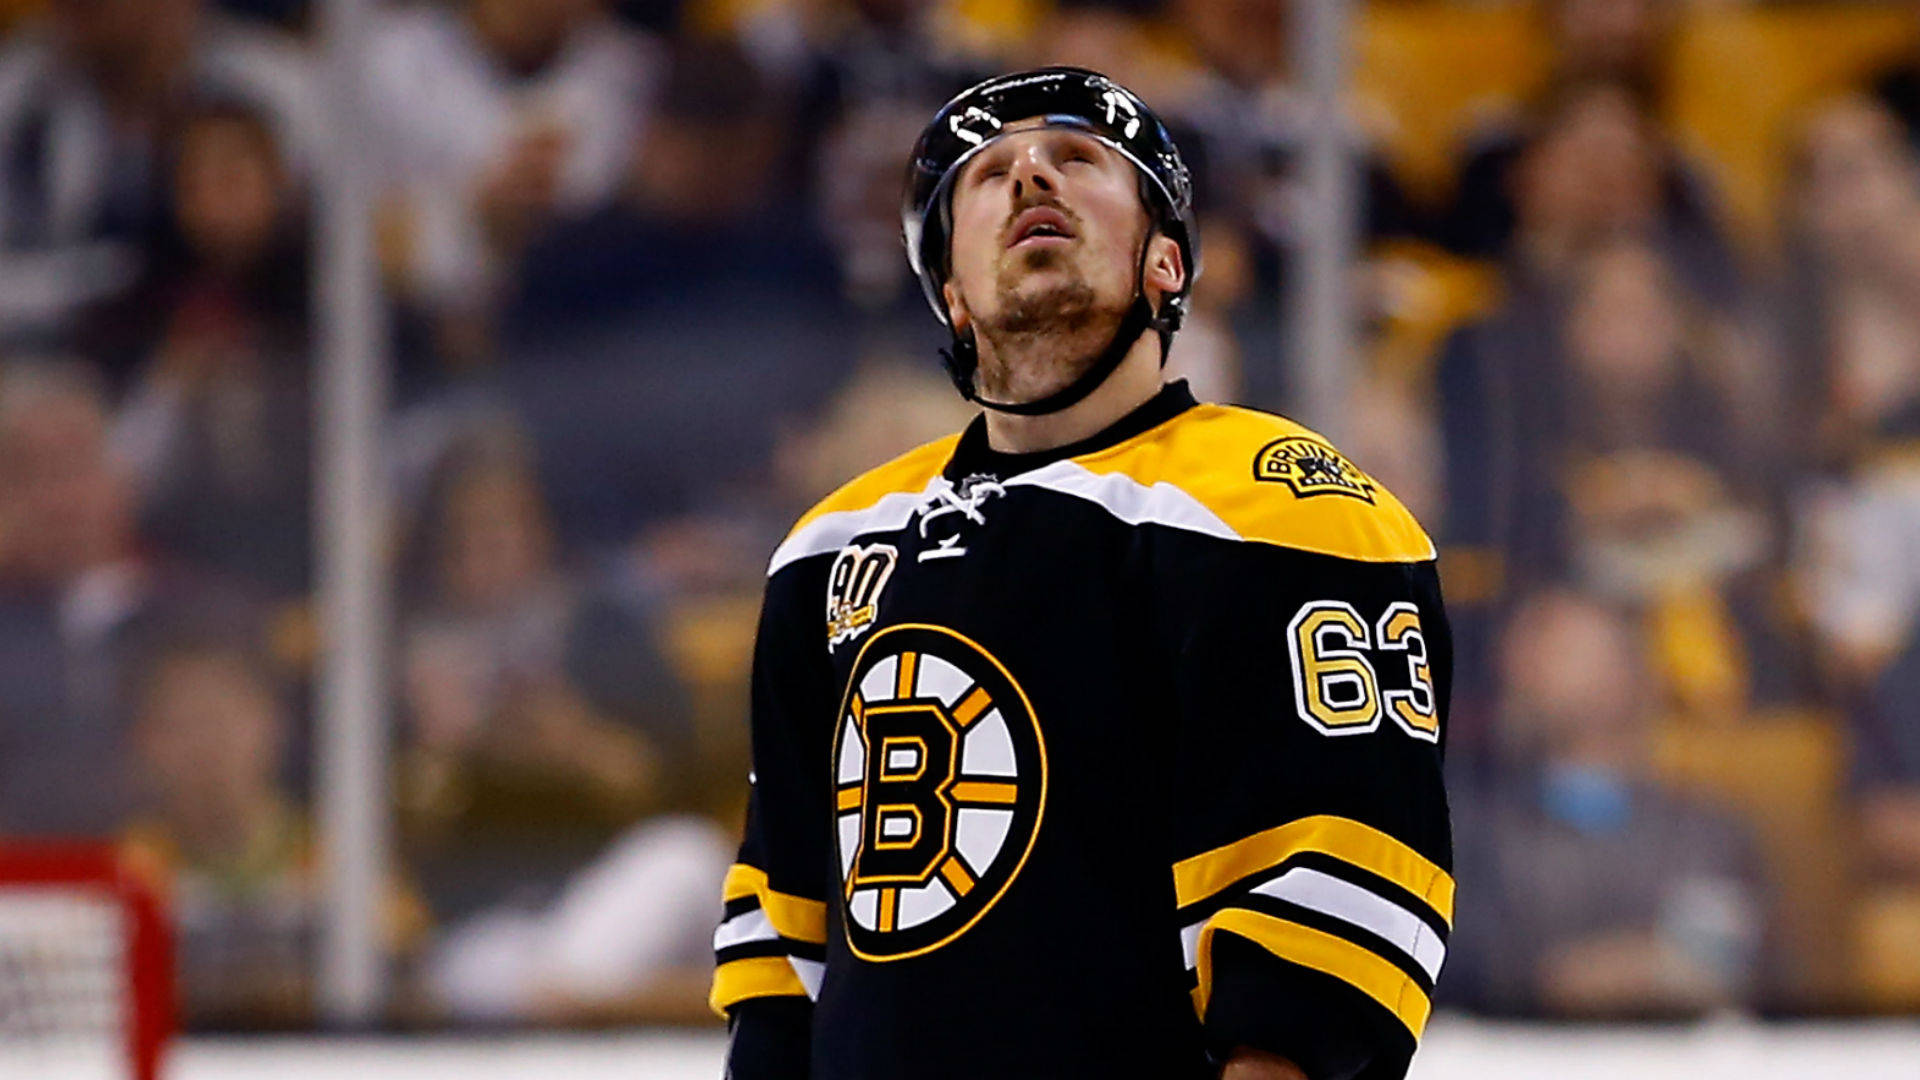 Professional Ice Hockey Star Brad Marchand in Action Wallpaper